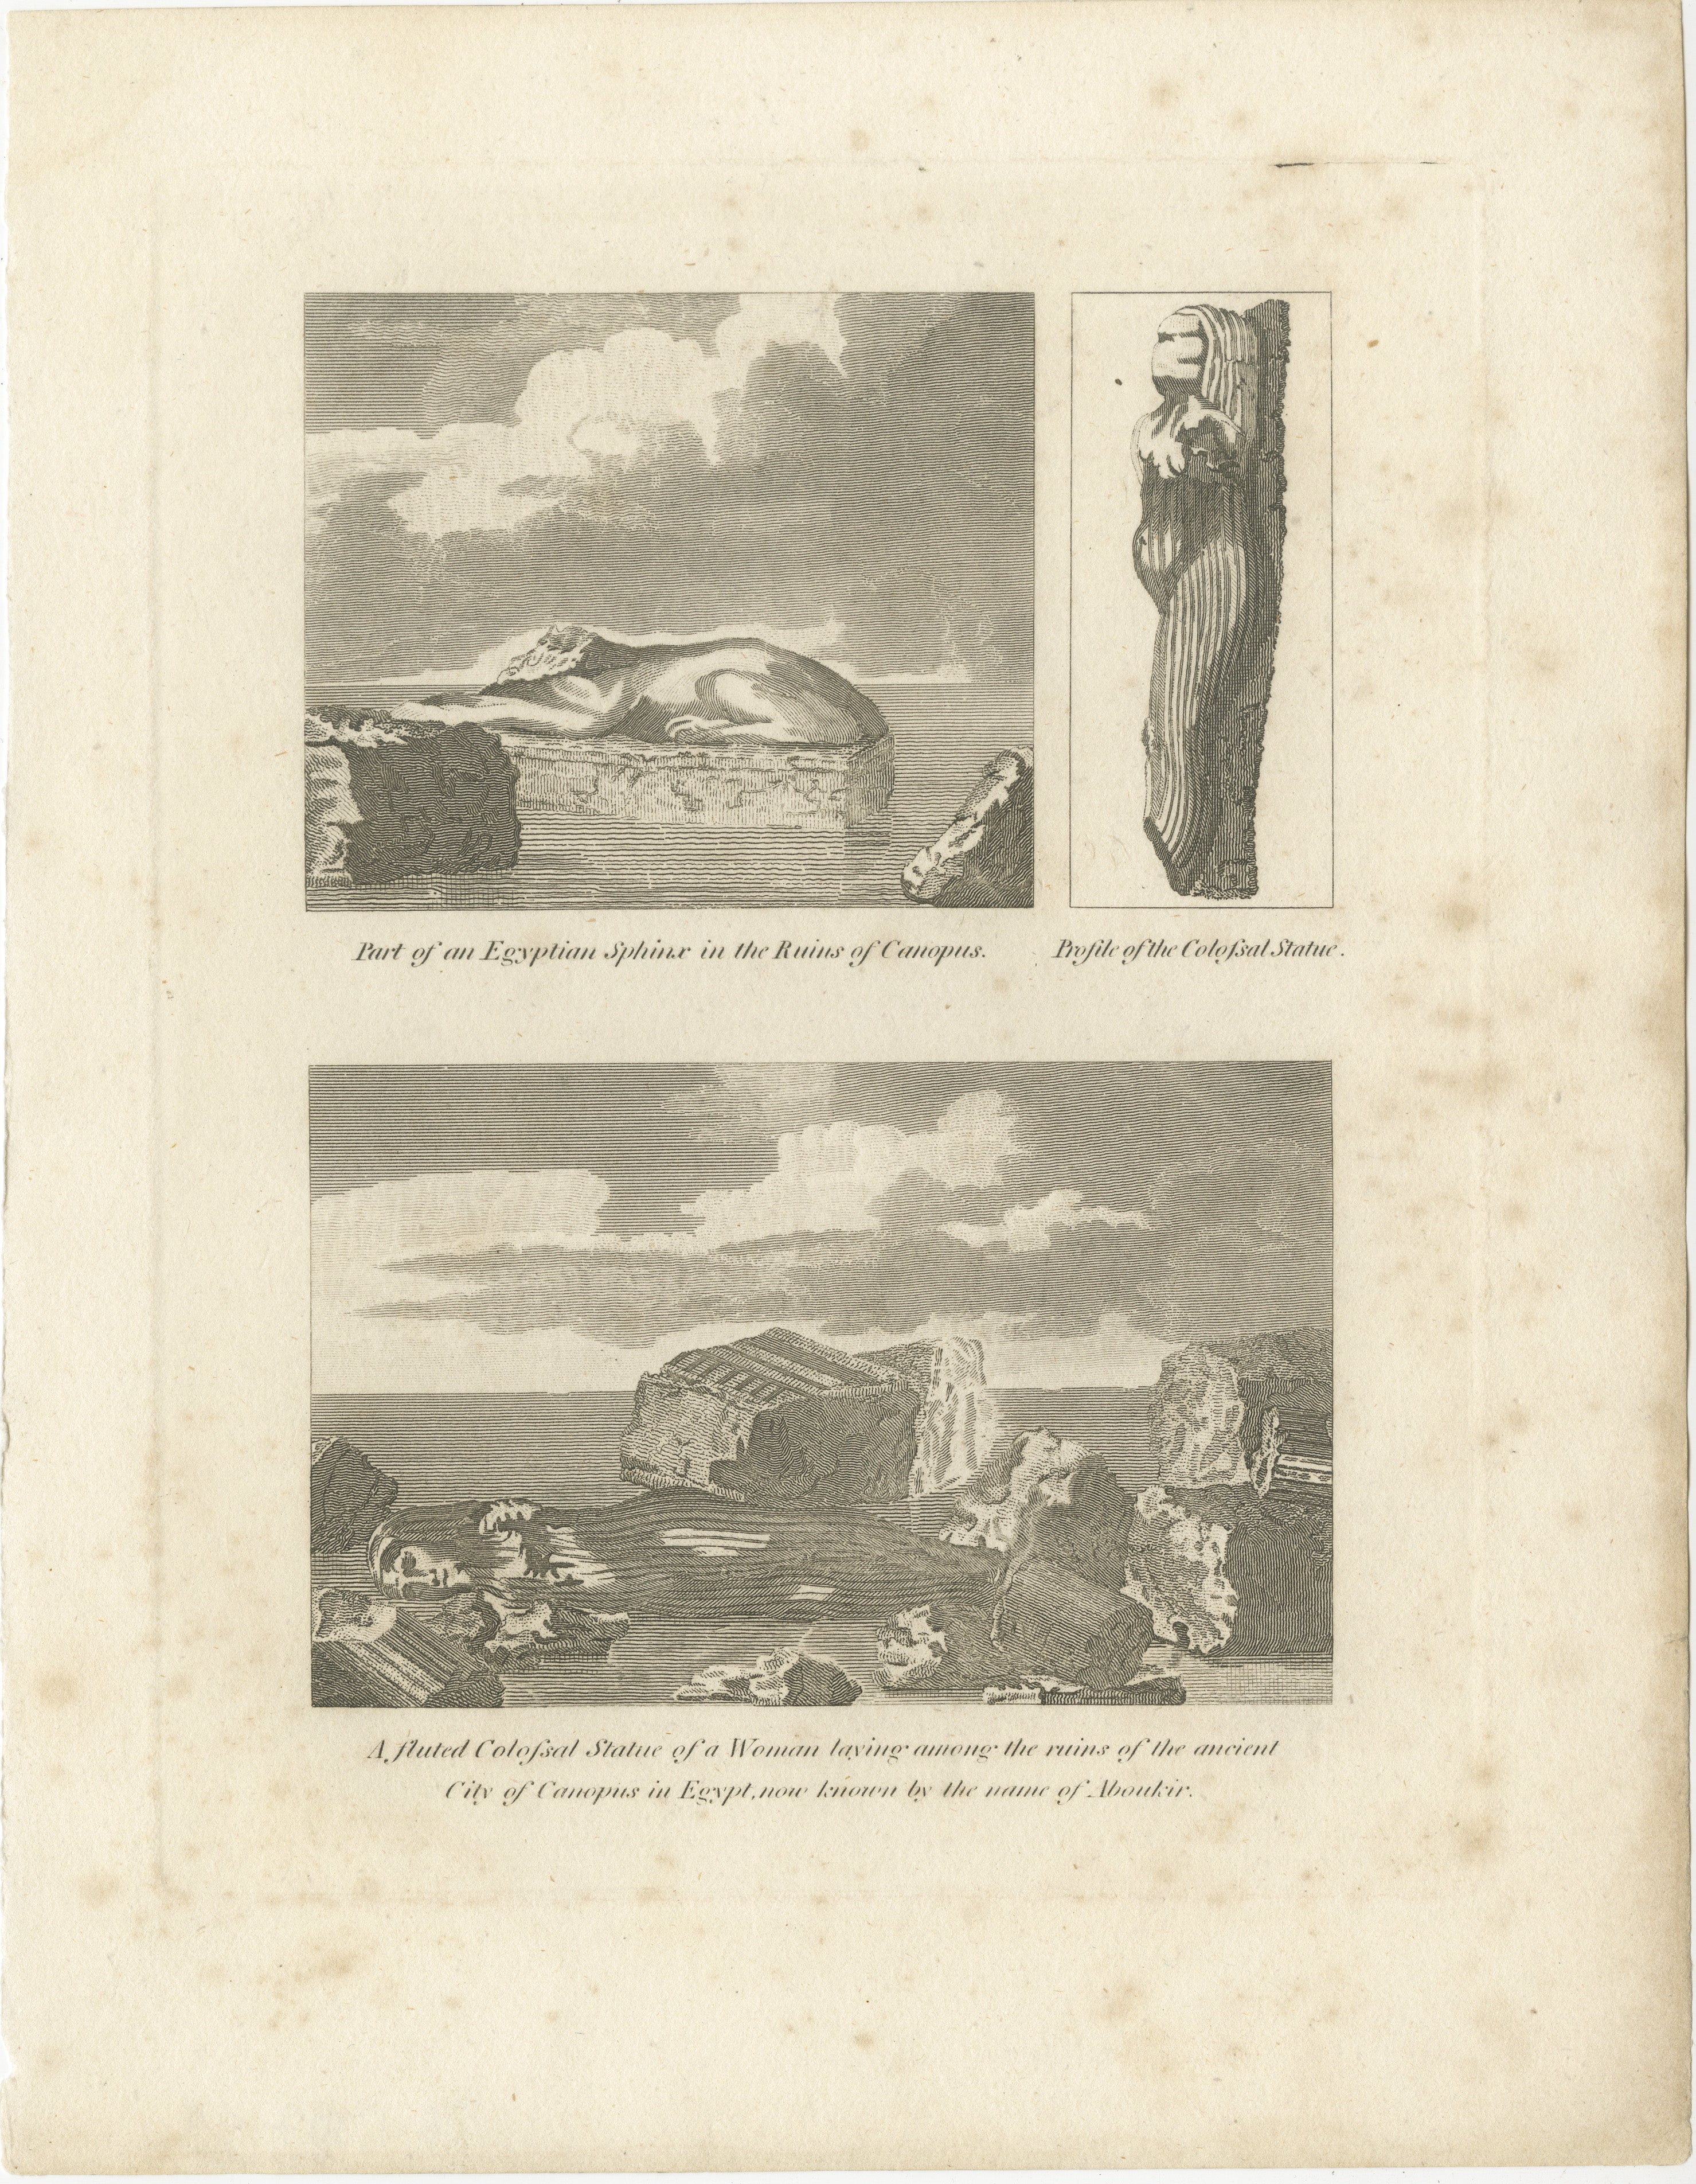 Engraved Relics of Antiquity: Egyptian Sphinx and Colossal Statues of Canopus, 1801 For Sale